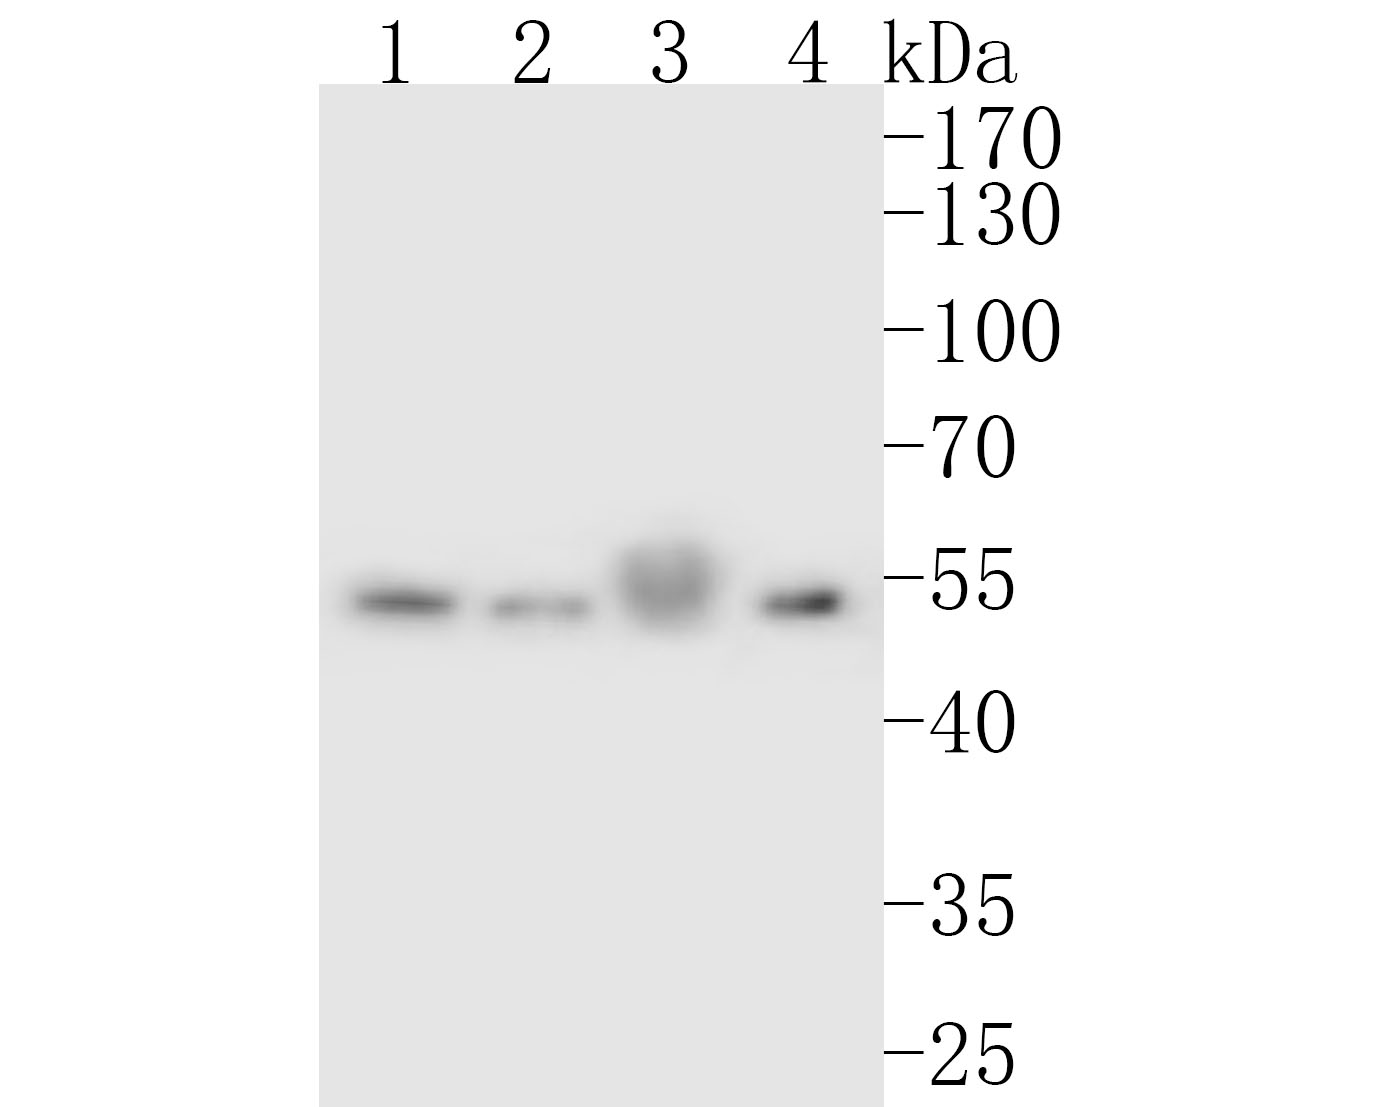 Western blot analysis of ONECUT3 on different lysates. Proteins were transferred to a PVDF membrane and blocked with 5% BSA in PBS for 1 hour at room temperature. The primary antibody (HA500130, 1/500) was used in 5% BSA at room temperature for 2 hours. Goat Anti-Rabbit IgG - HRP Secondary Antibody (HA1001) at 1:5,000 dilution was used for 1 hour at room temperature.<br />
Positive control: <br />
Lane 1: SW480 cell lysate<br />
Lane 2: Hela cell lysate<br />
Lane 3: Human stomach tissue lysate<br />
Lane 4: AGS cell lysate